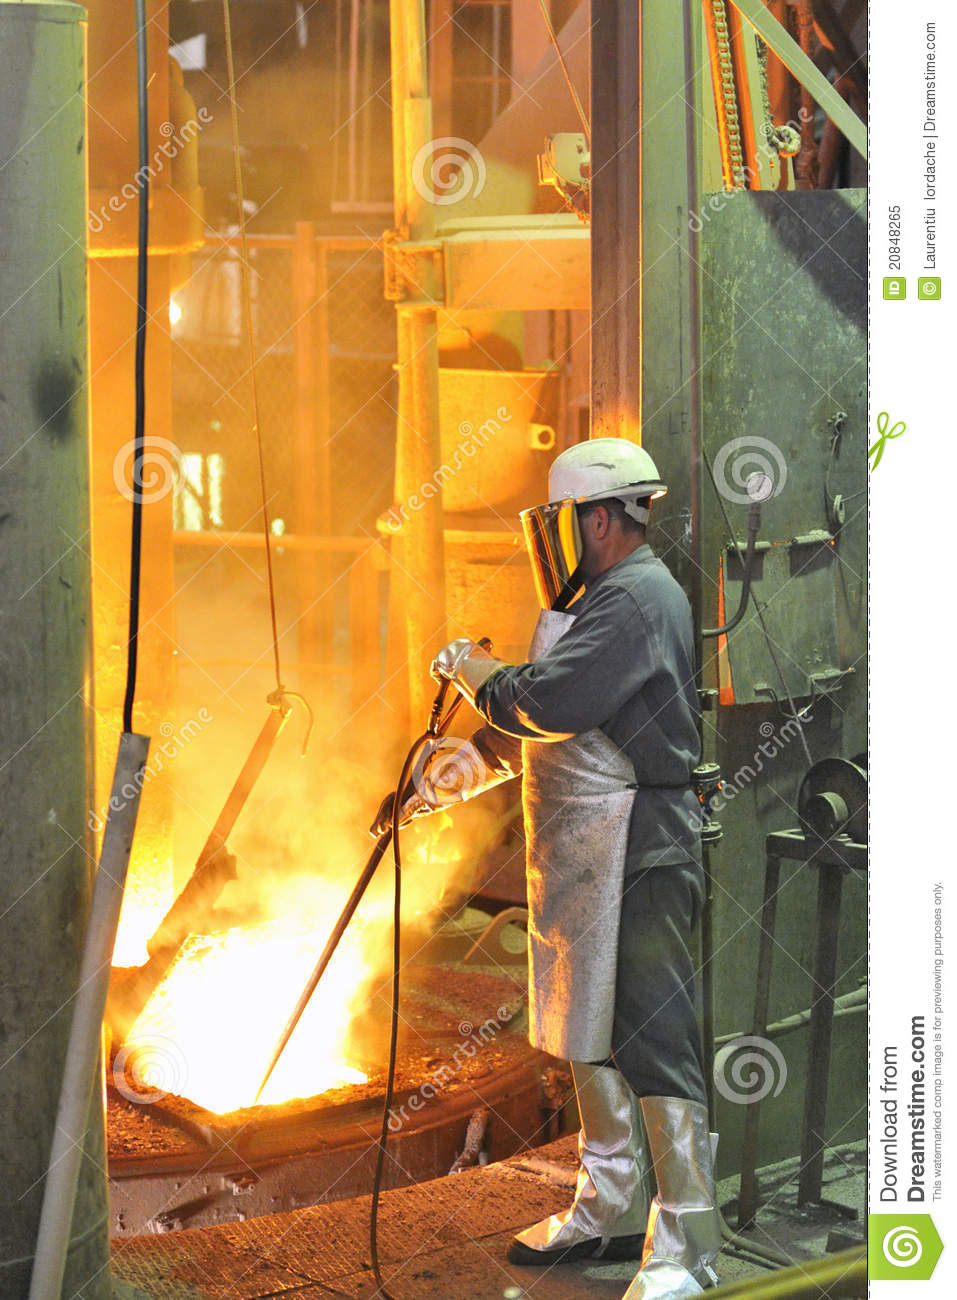 Mill Worker With Hot Steel Royalty Free Stock Photo   Image  20848265